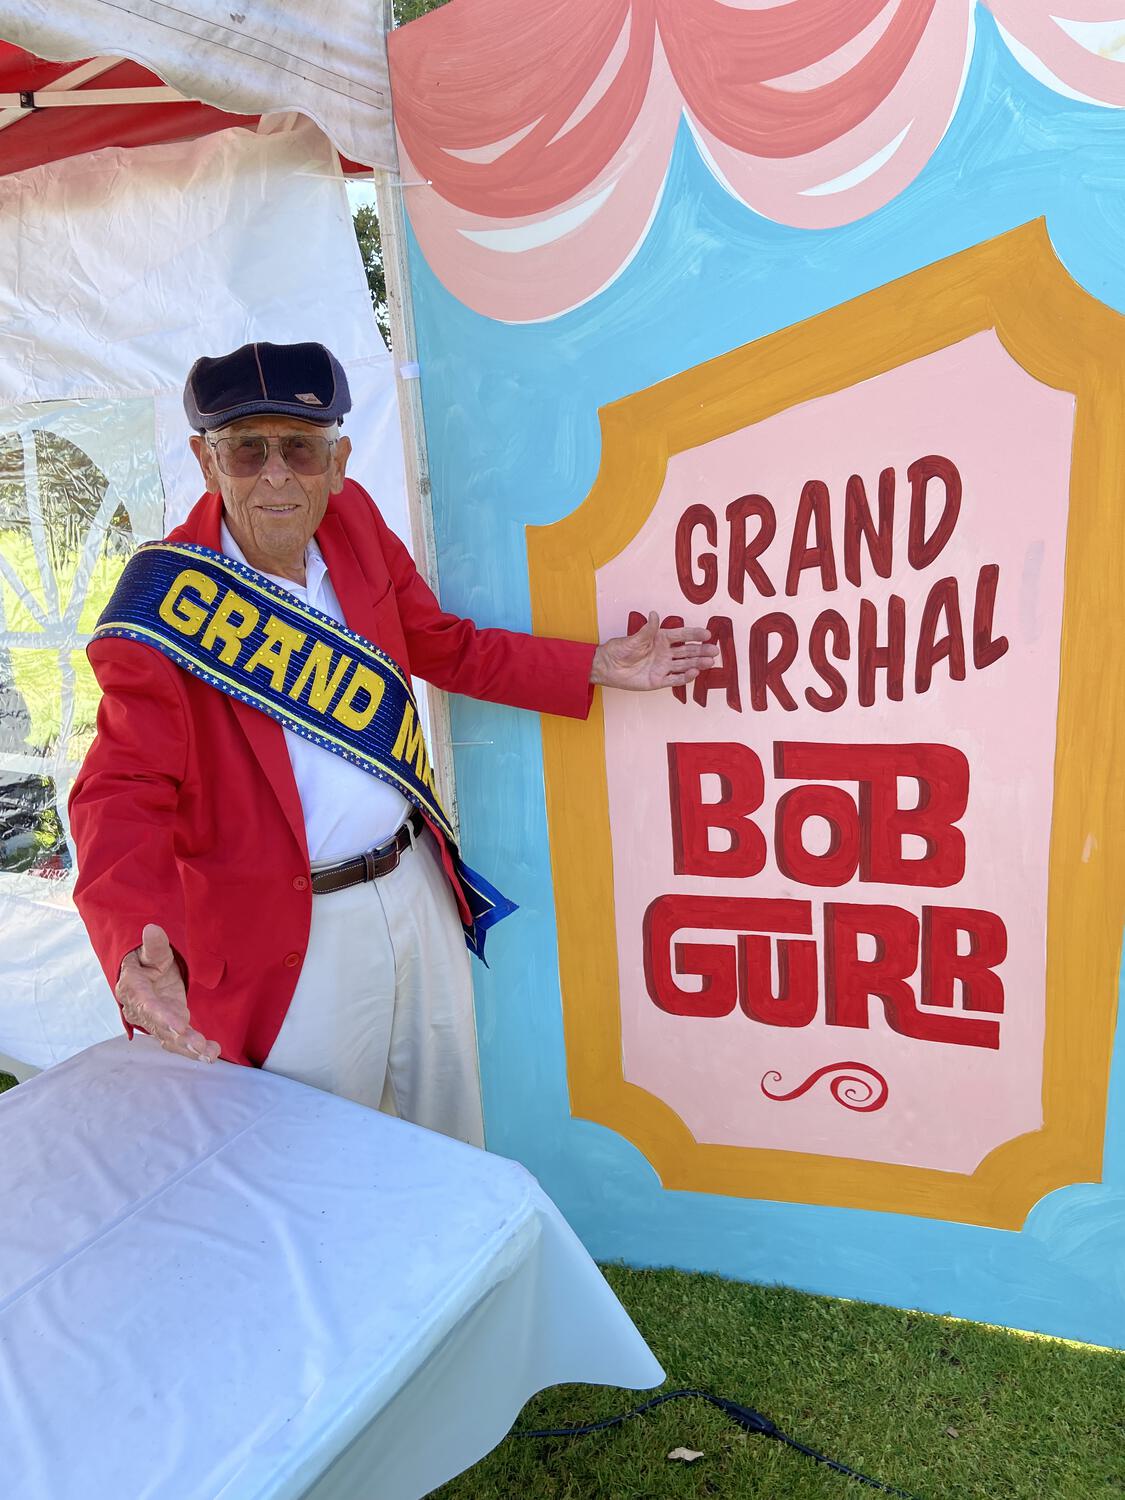 Bob Gurr posing in front of a sign that reads "Grand Marshal Bob Gurr"